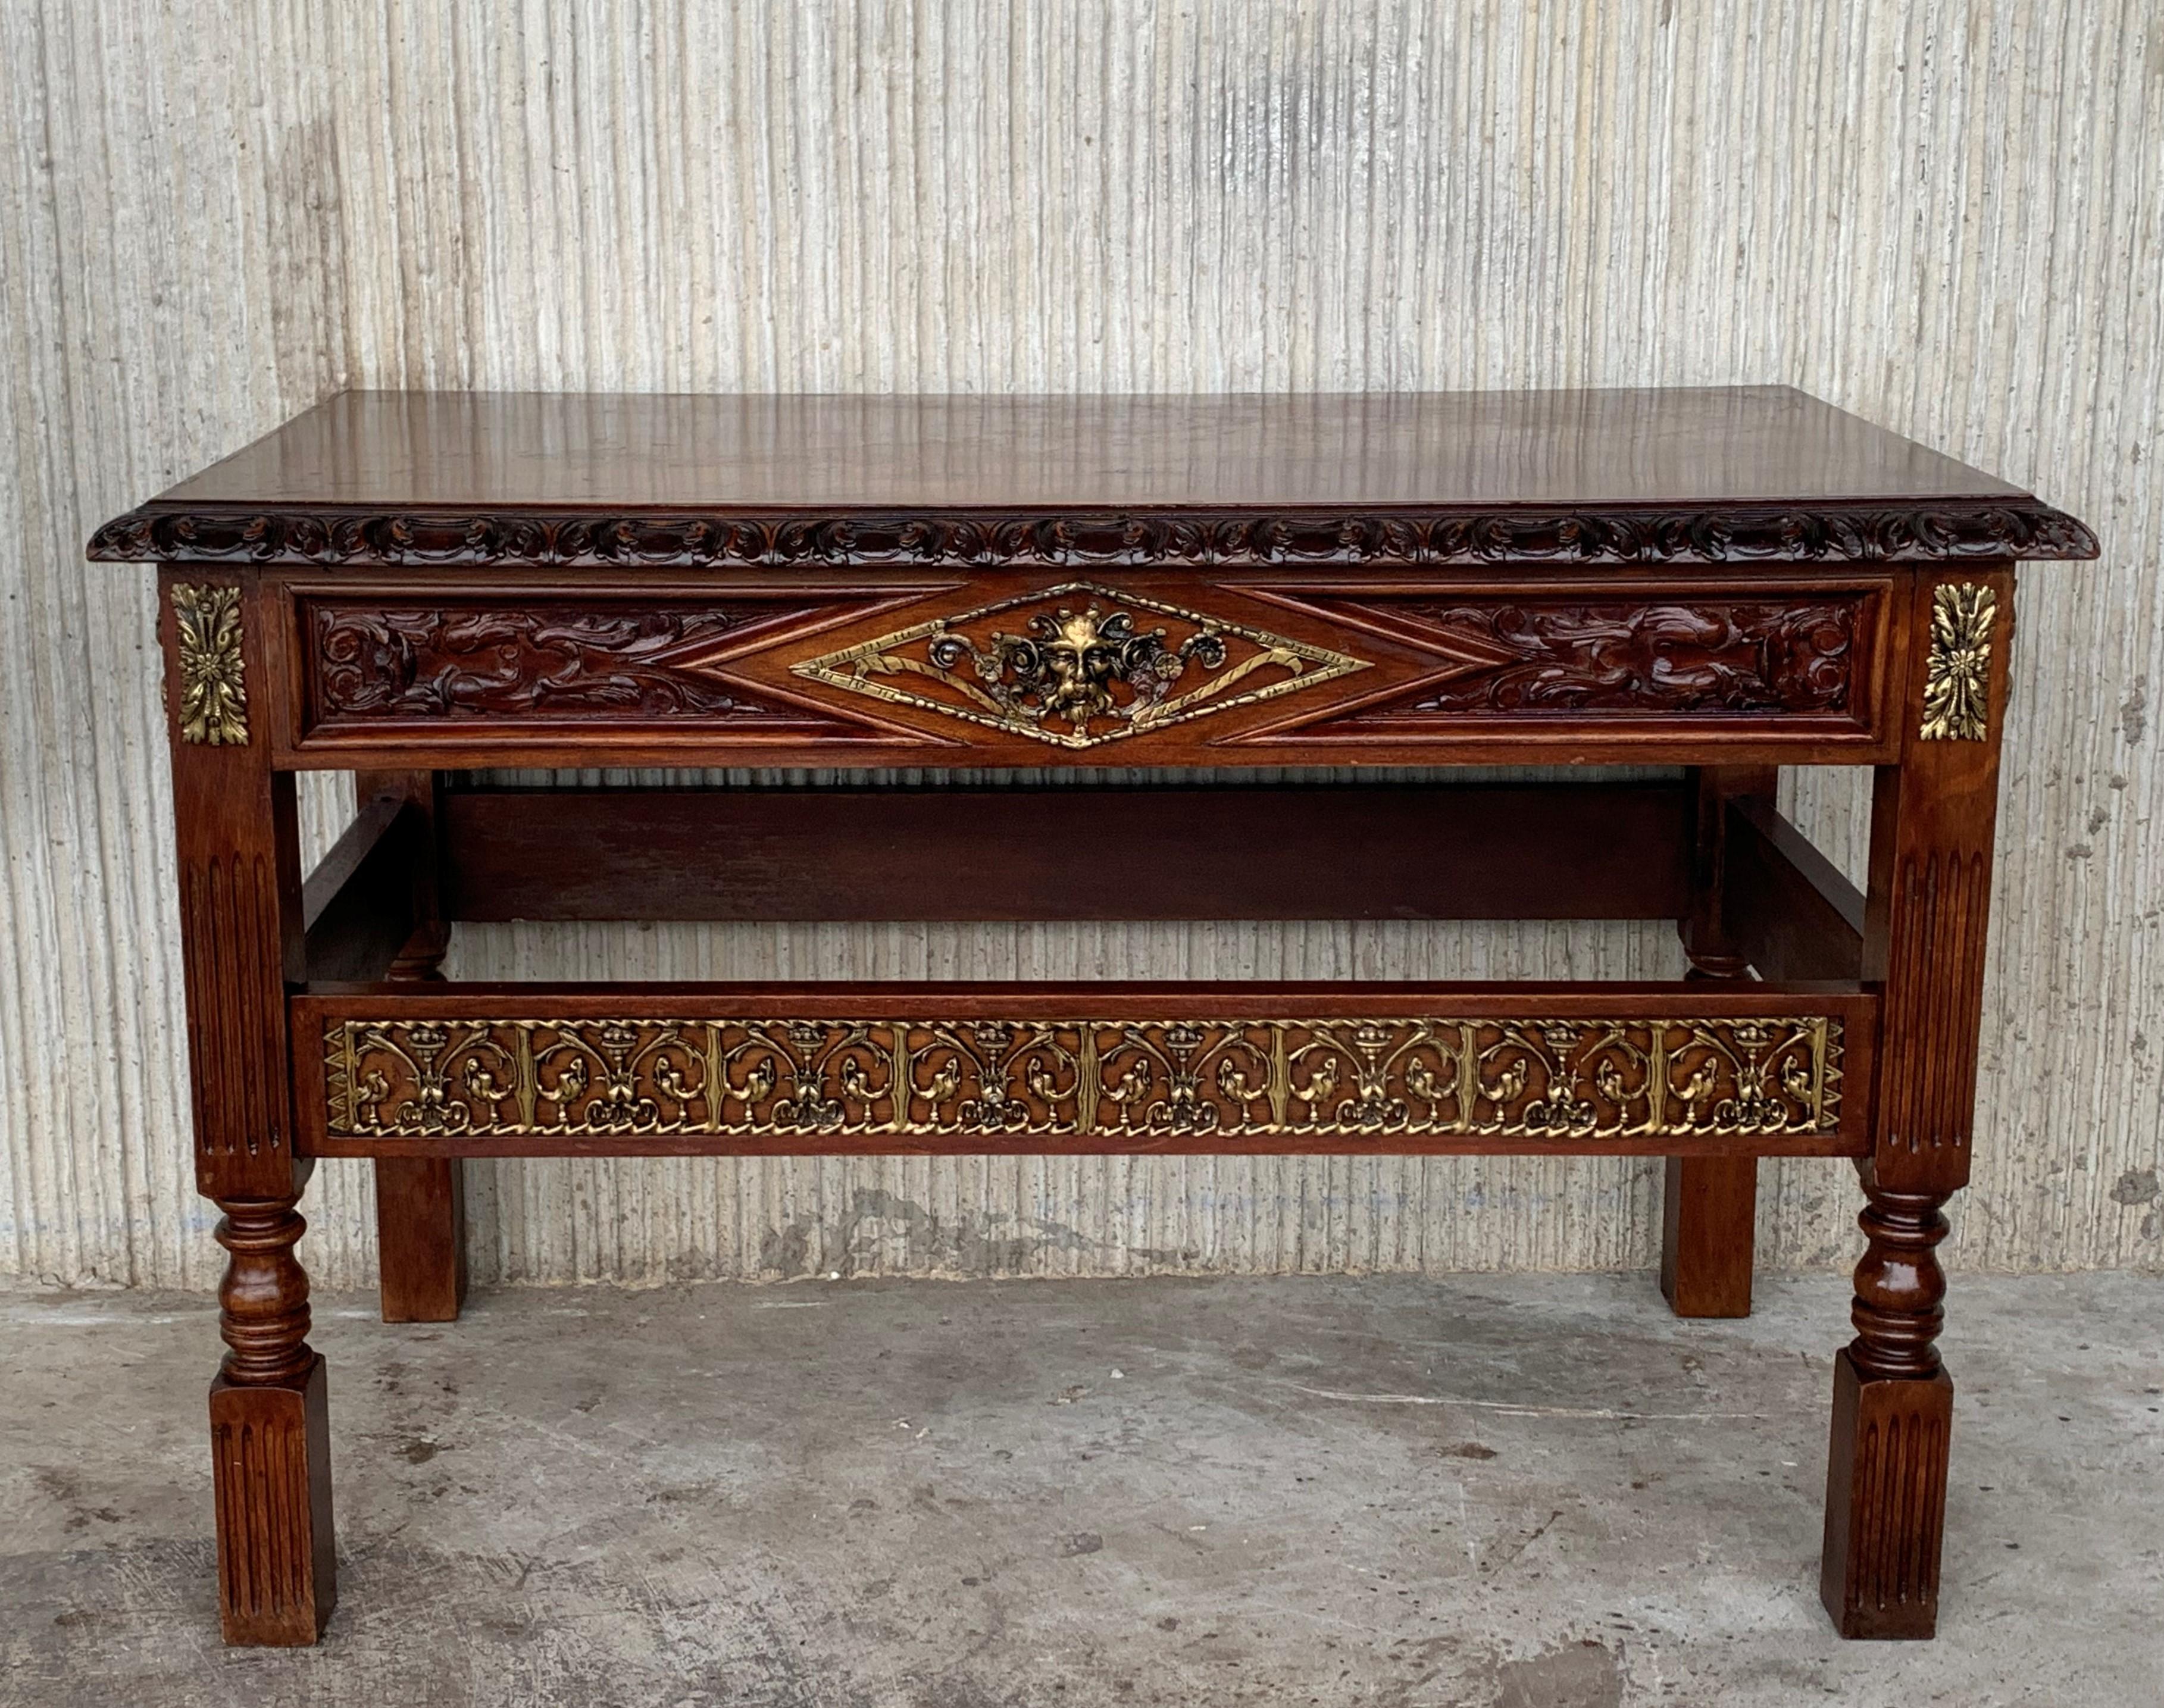 Renaissance Revival Early 20th Carved Walnut Side Table with One Drawer and Bronze Mounts For Sale